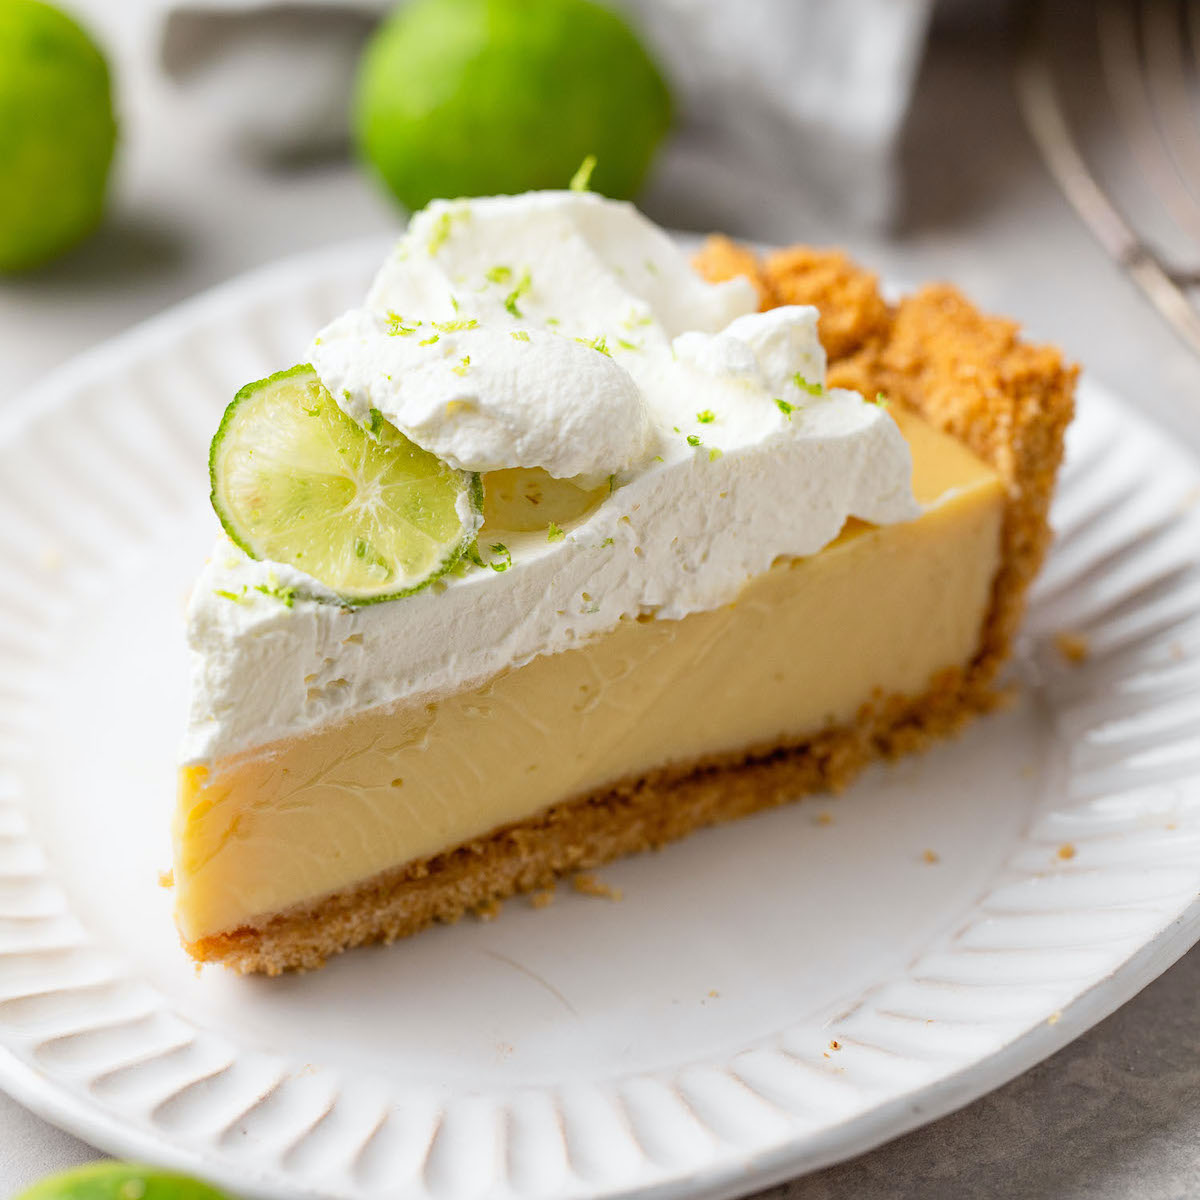 Related image of Key Lime Pie.